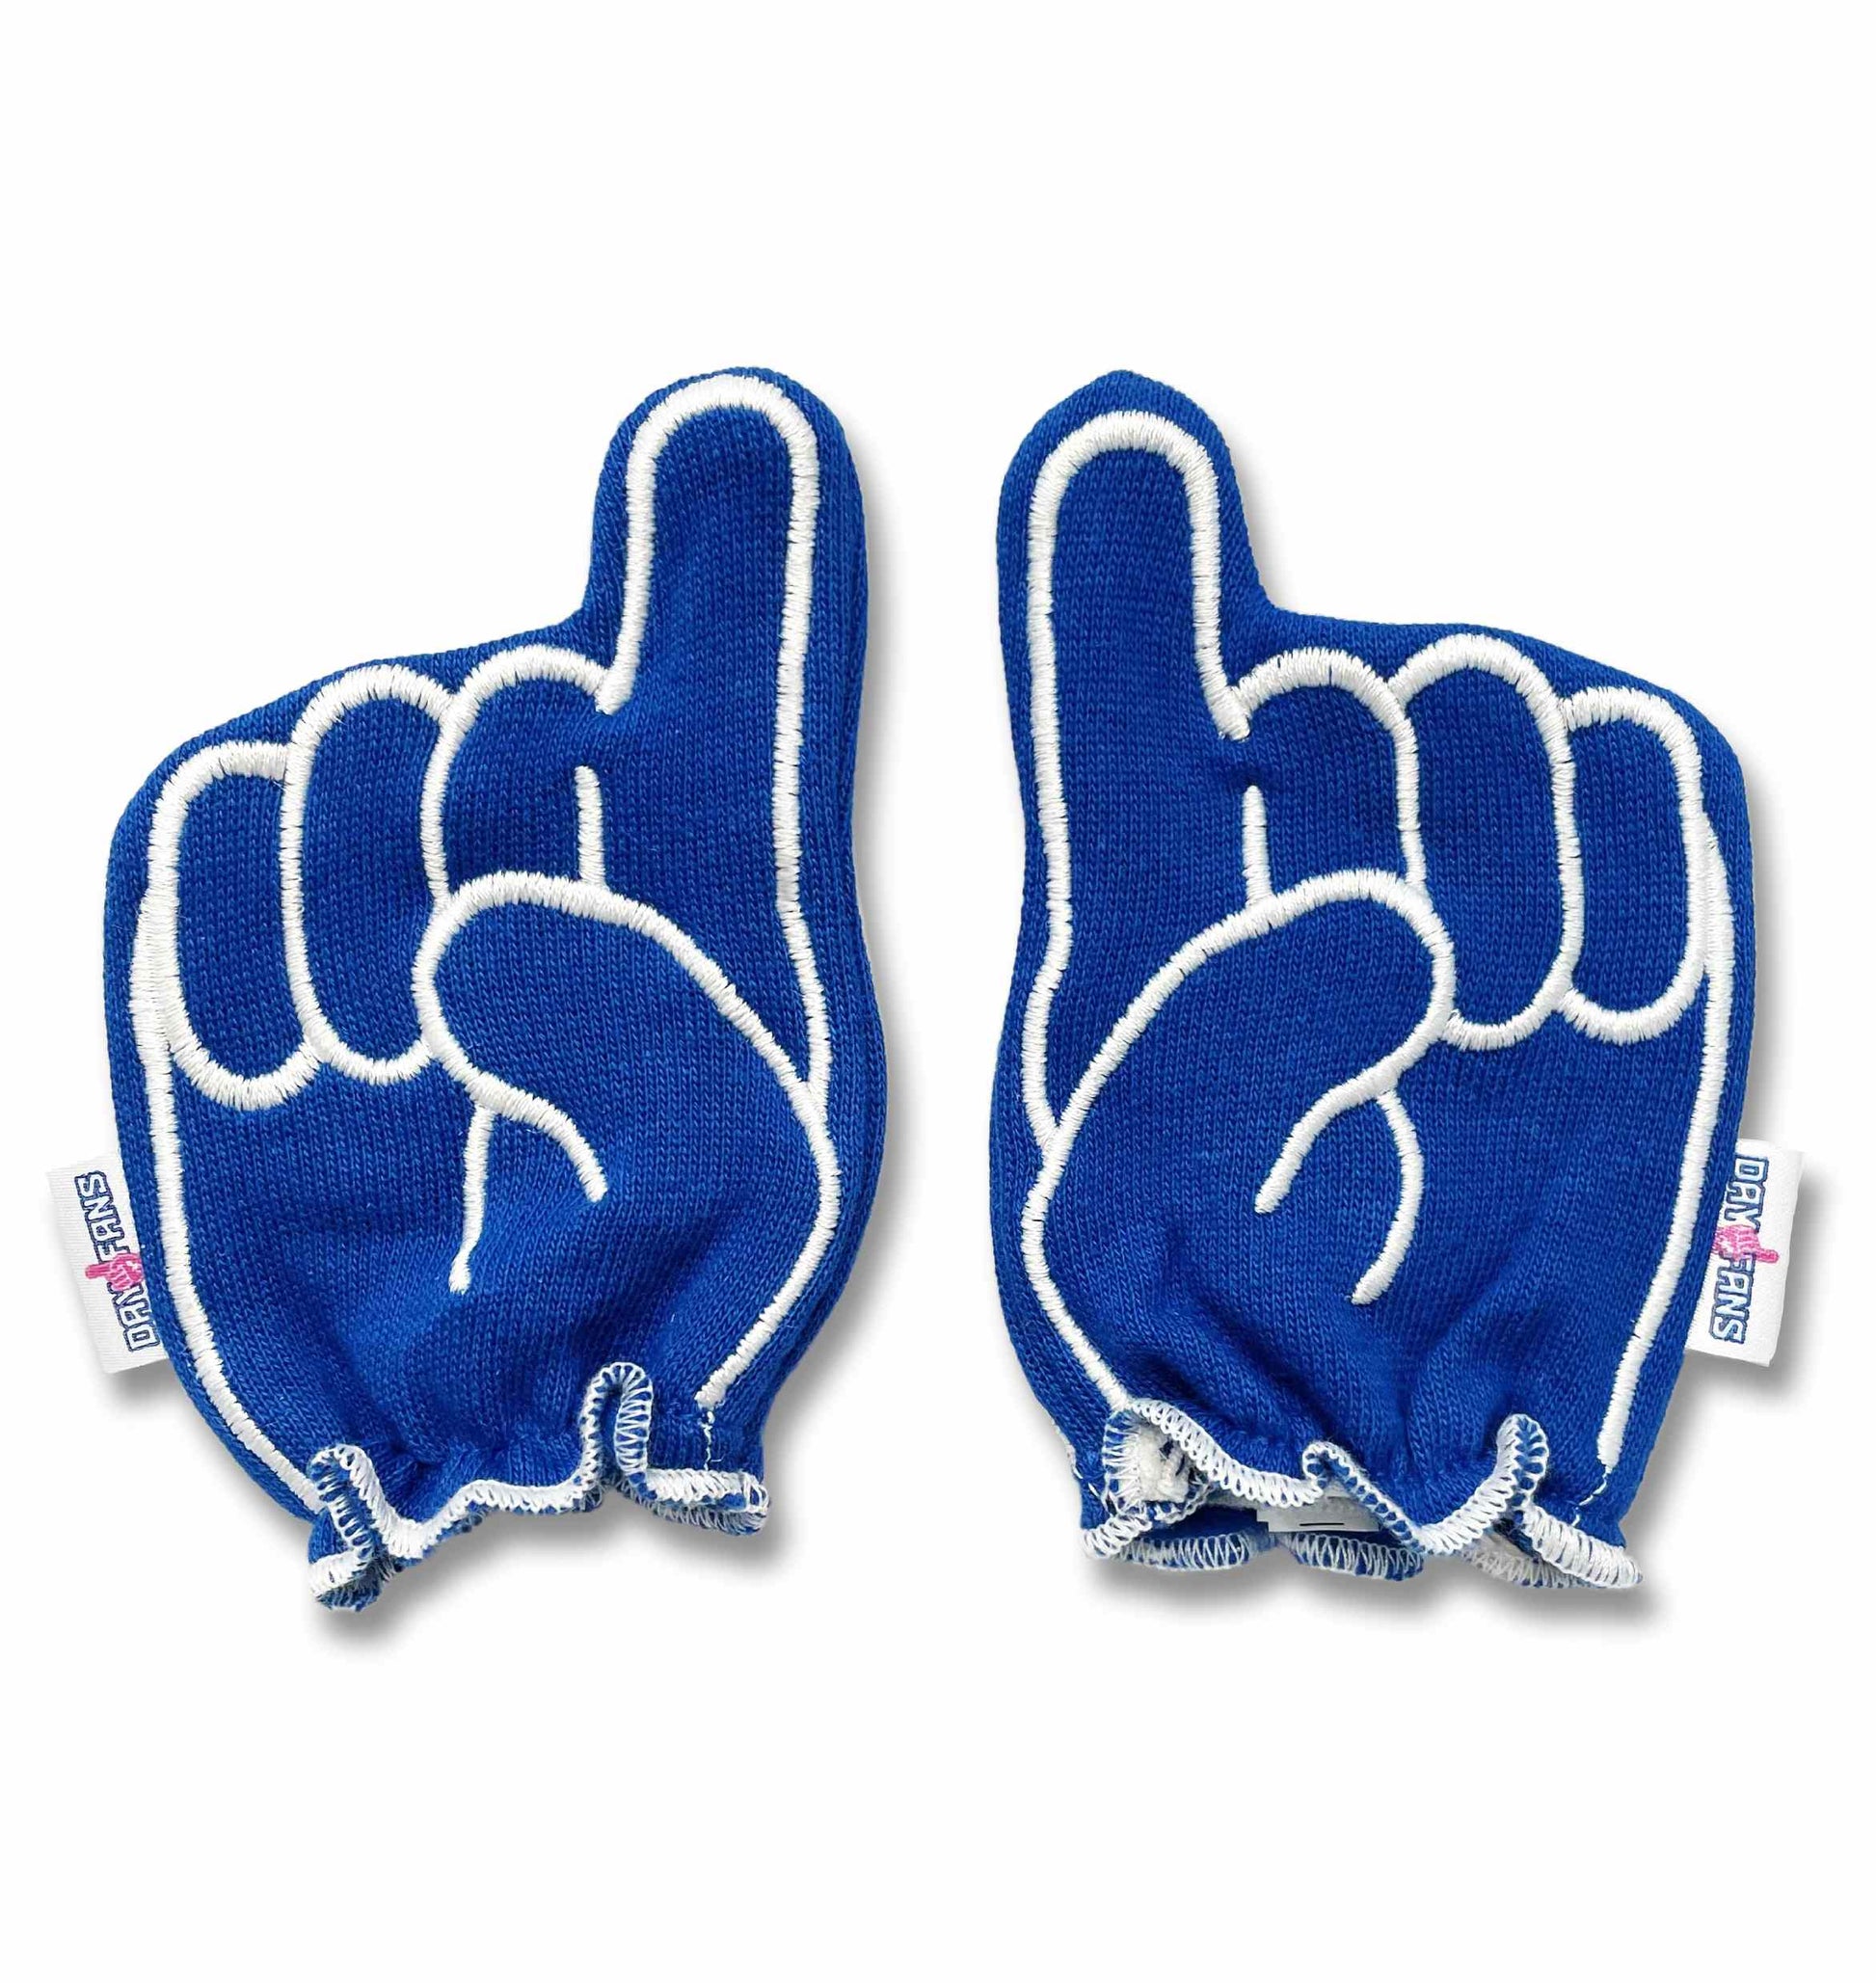 Florida Go Gators FanMitts Baby Mittens Blue Front Pair